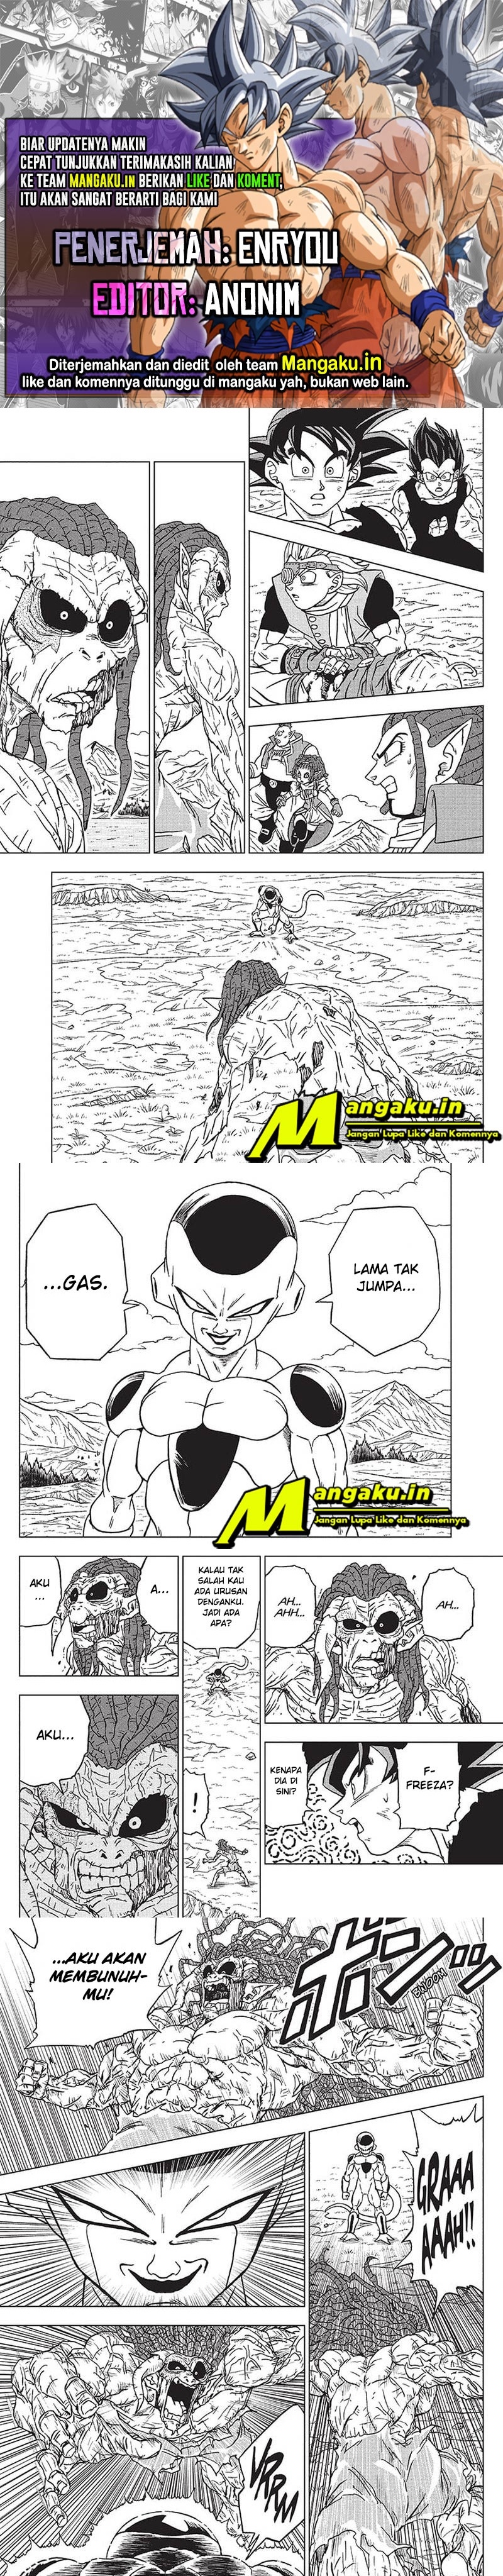 Dragon Ball Super: Chapter 87.2 - Page 1